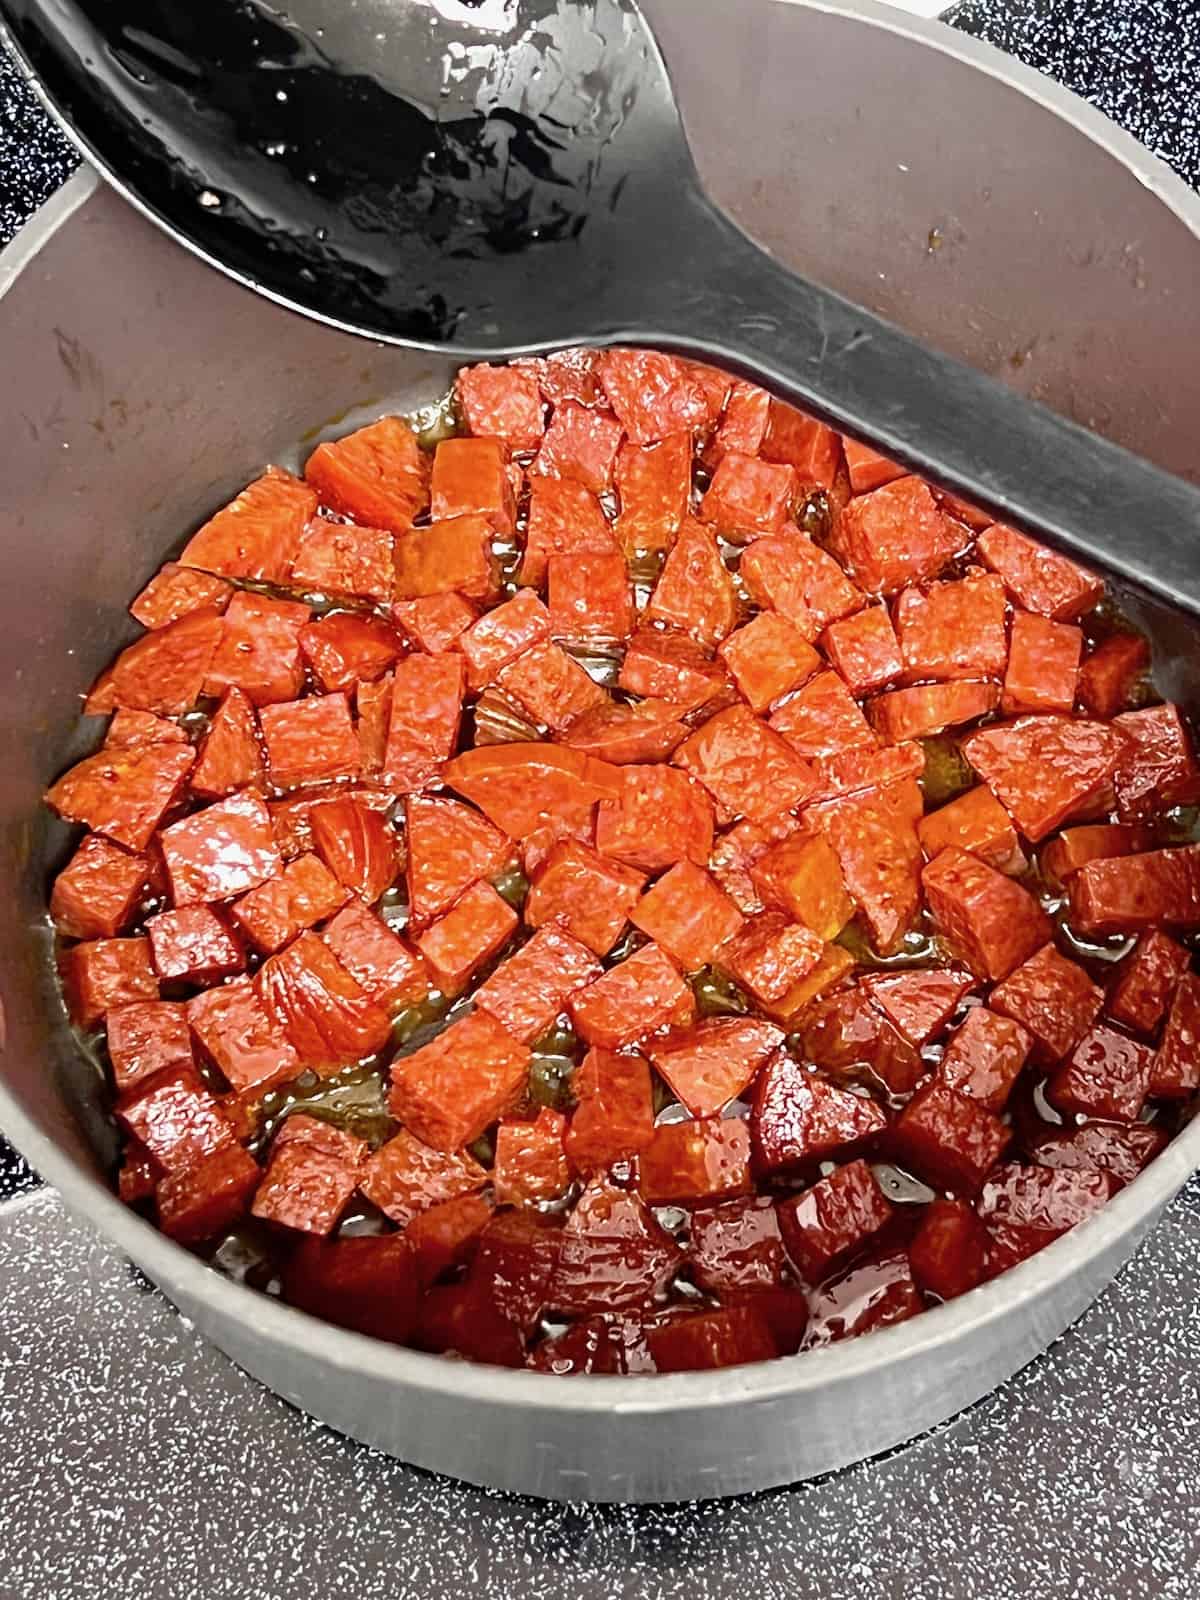 Pepperoni chunks cooking in the pot.